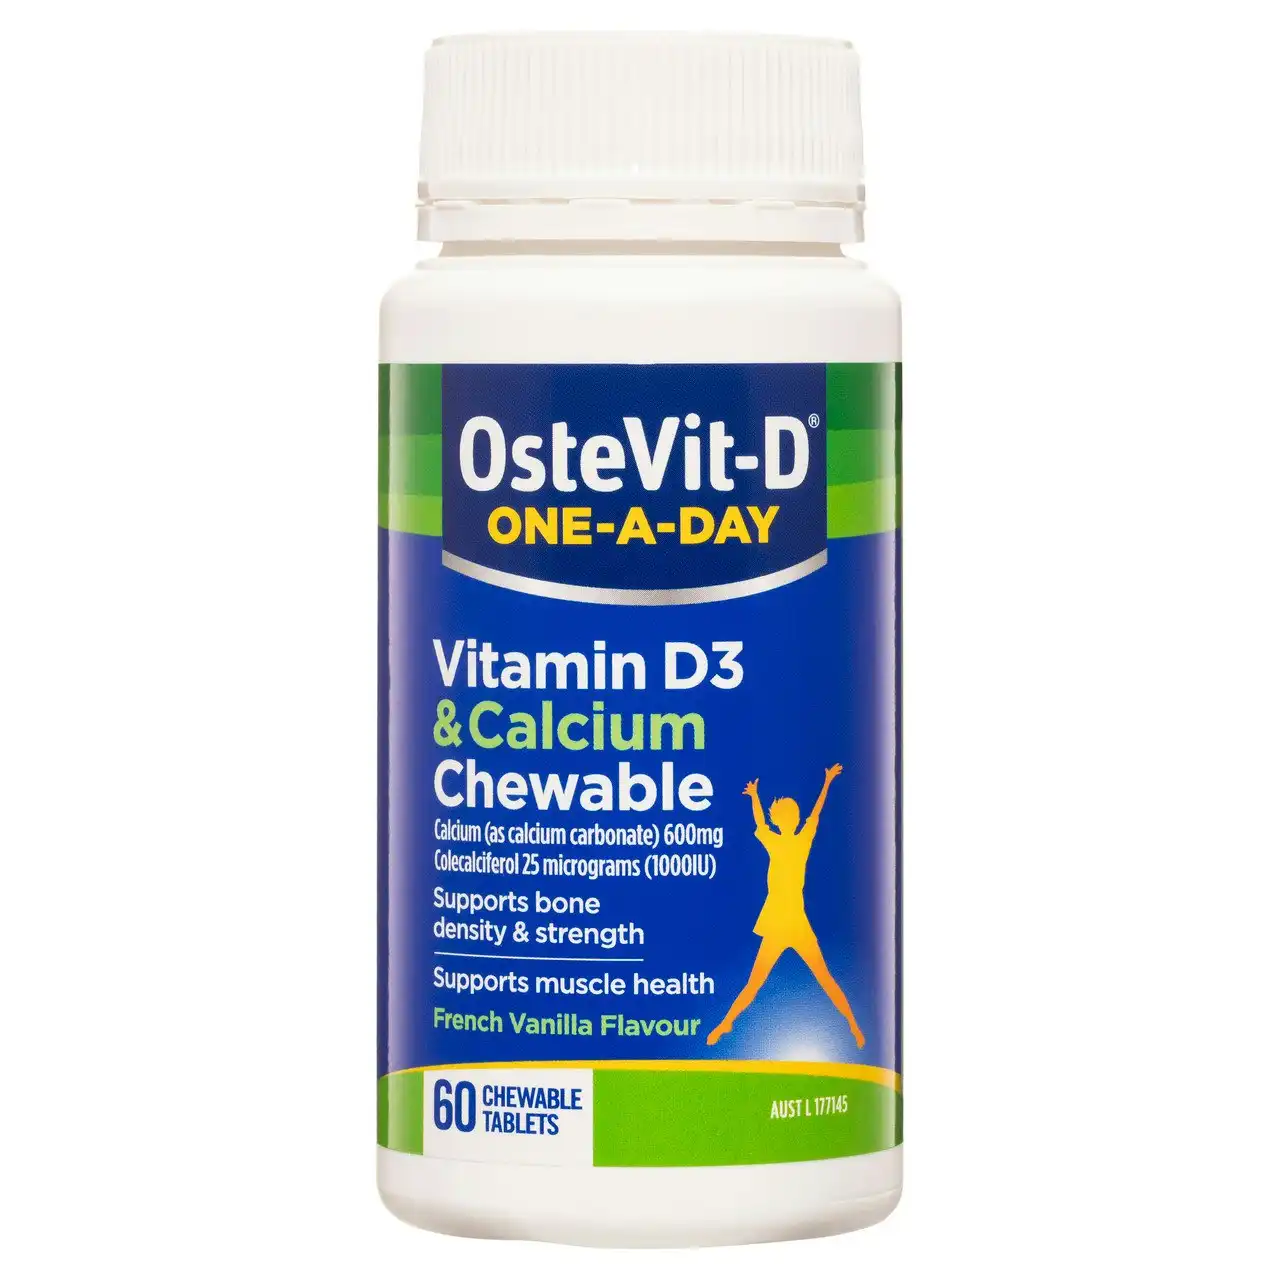 OsteVit-D One-A-Day Vitamin D3 & Calcium Chewable Tablets 60's